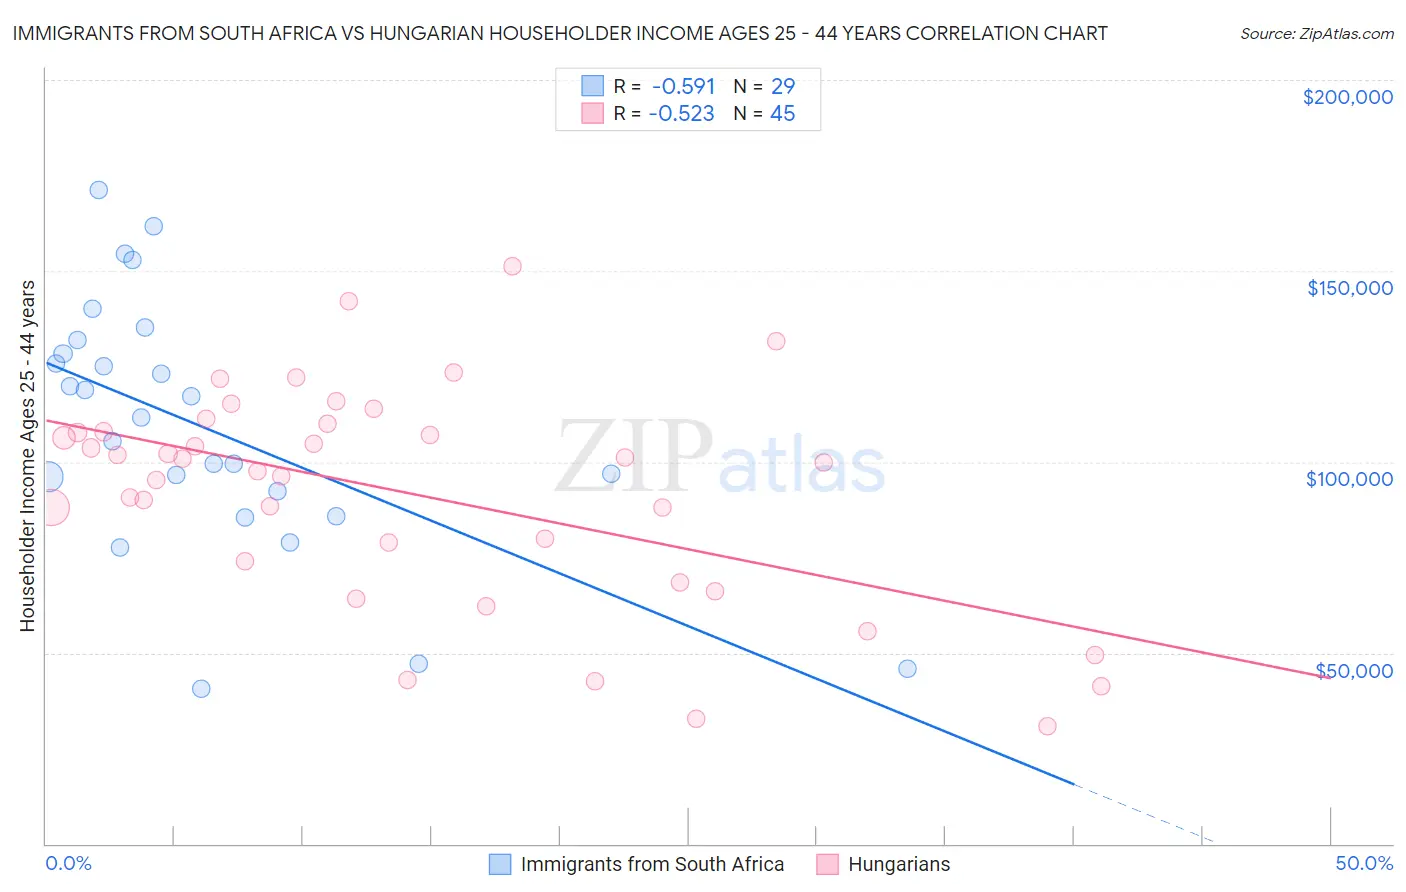 Immigrants from South Africa vs Hungarian Householder Income Ages 25 - 44 years